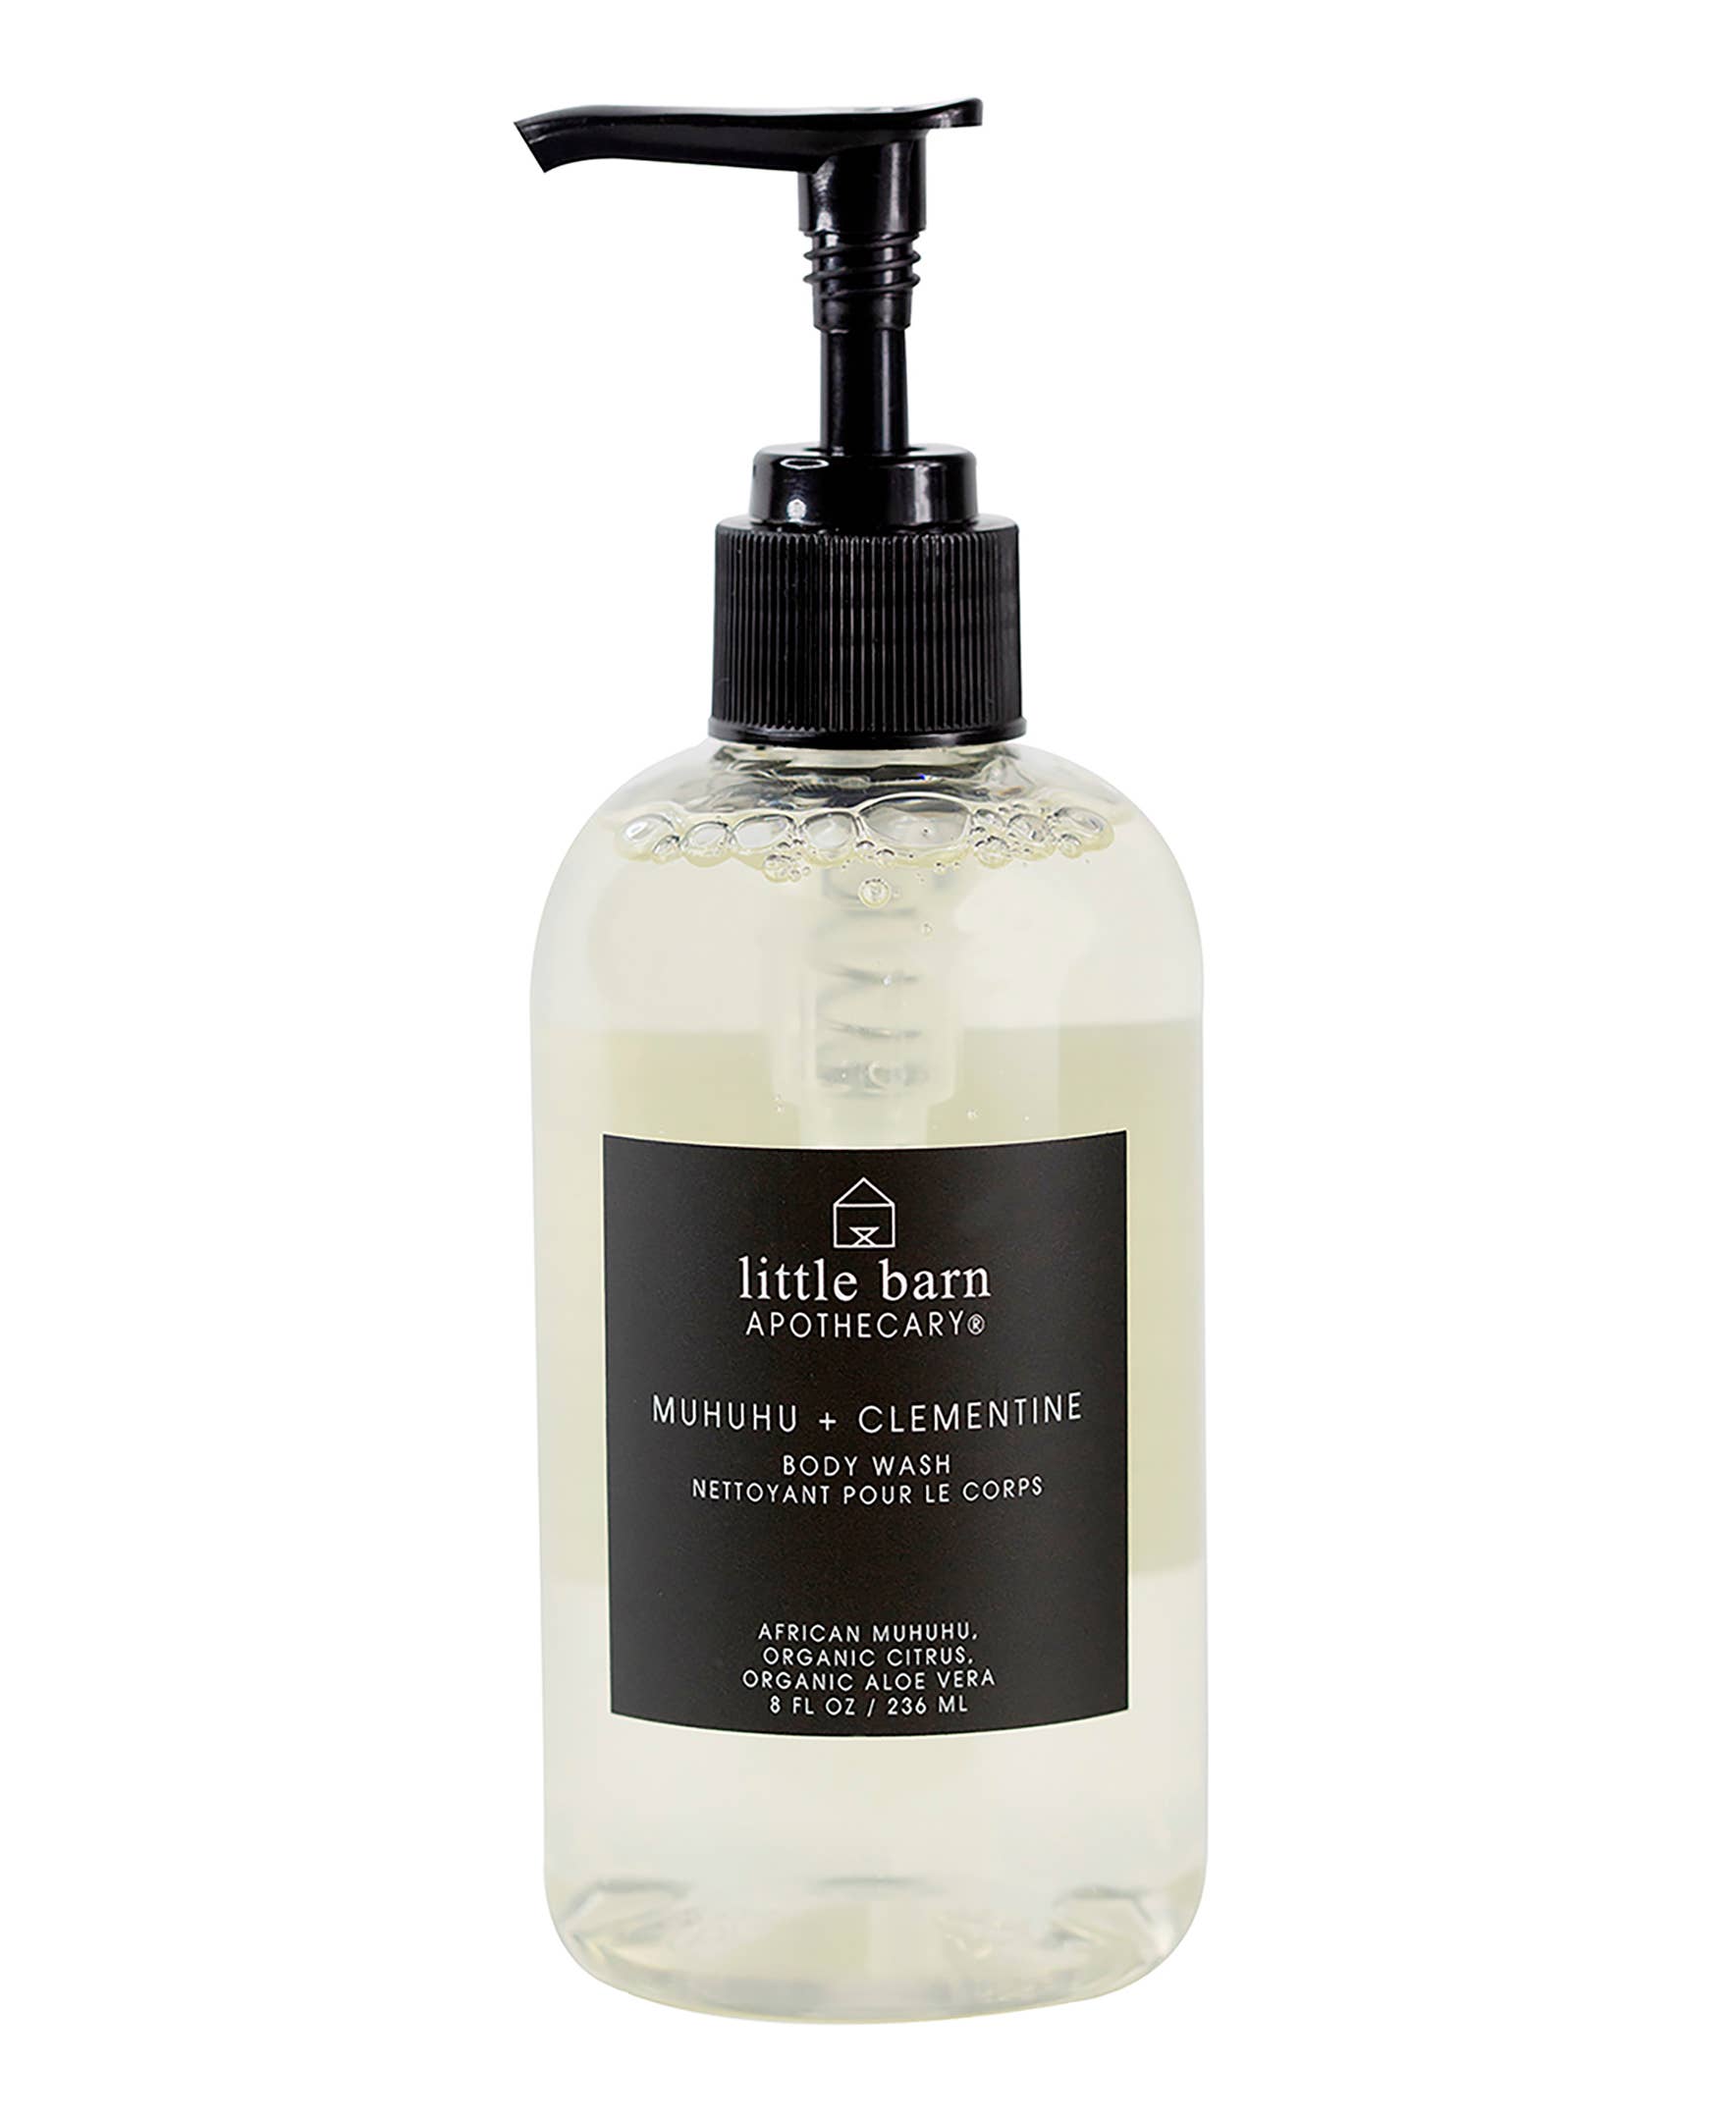 Little Barn Apothecary Muhuhu and Clementine Body Wash